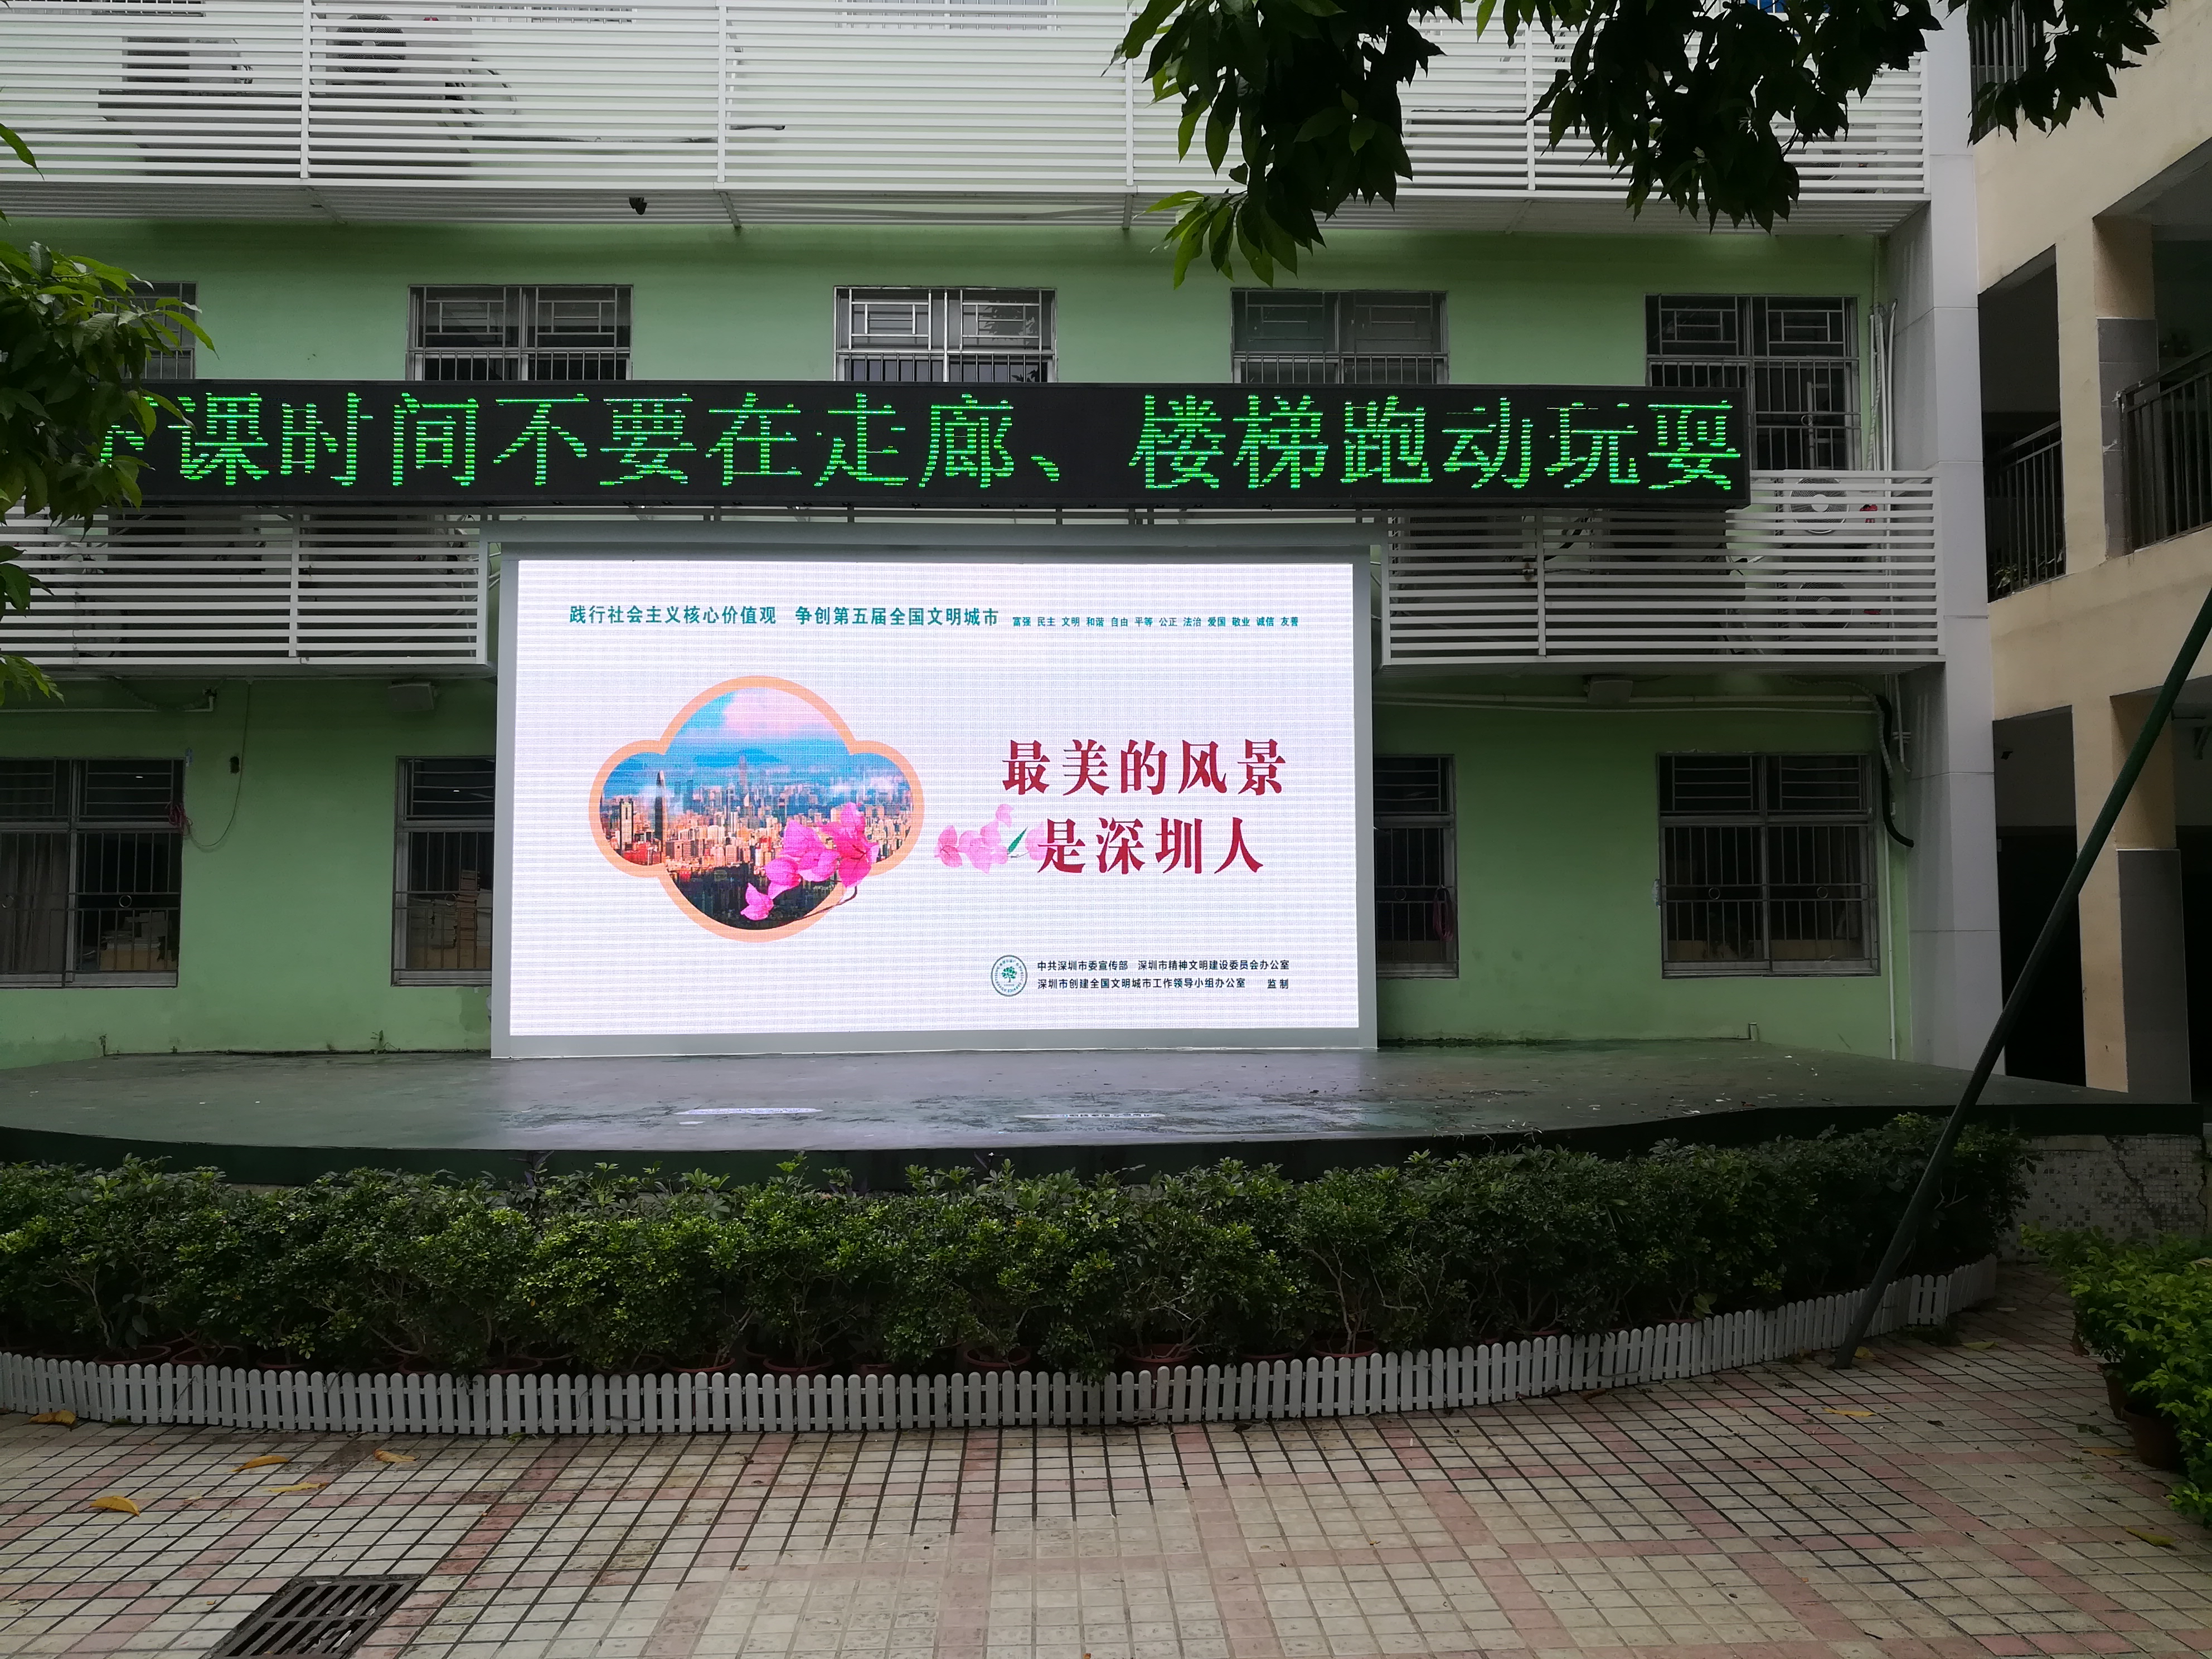 https://www.szradiant.com/products/fixed-instaltion-led-display/fixed-outdoor-led-display/